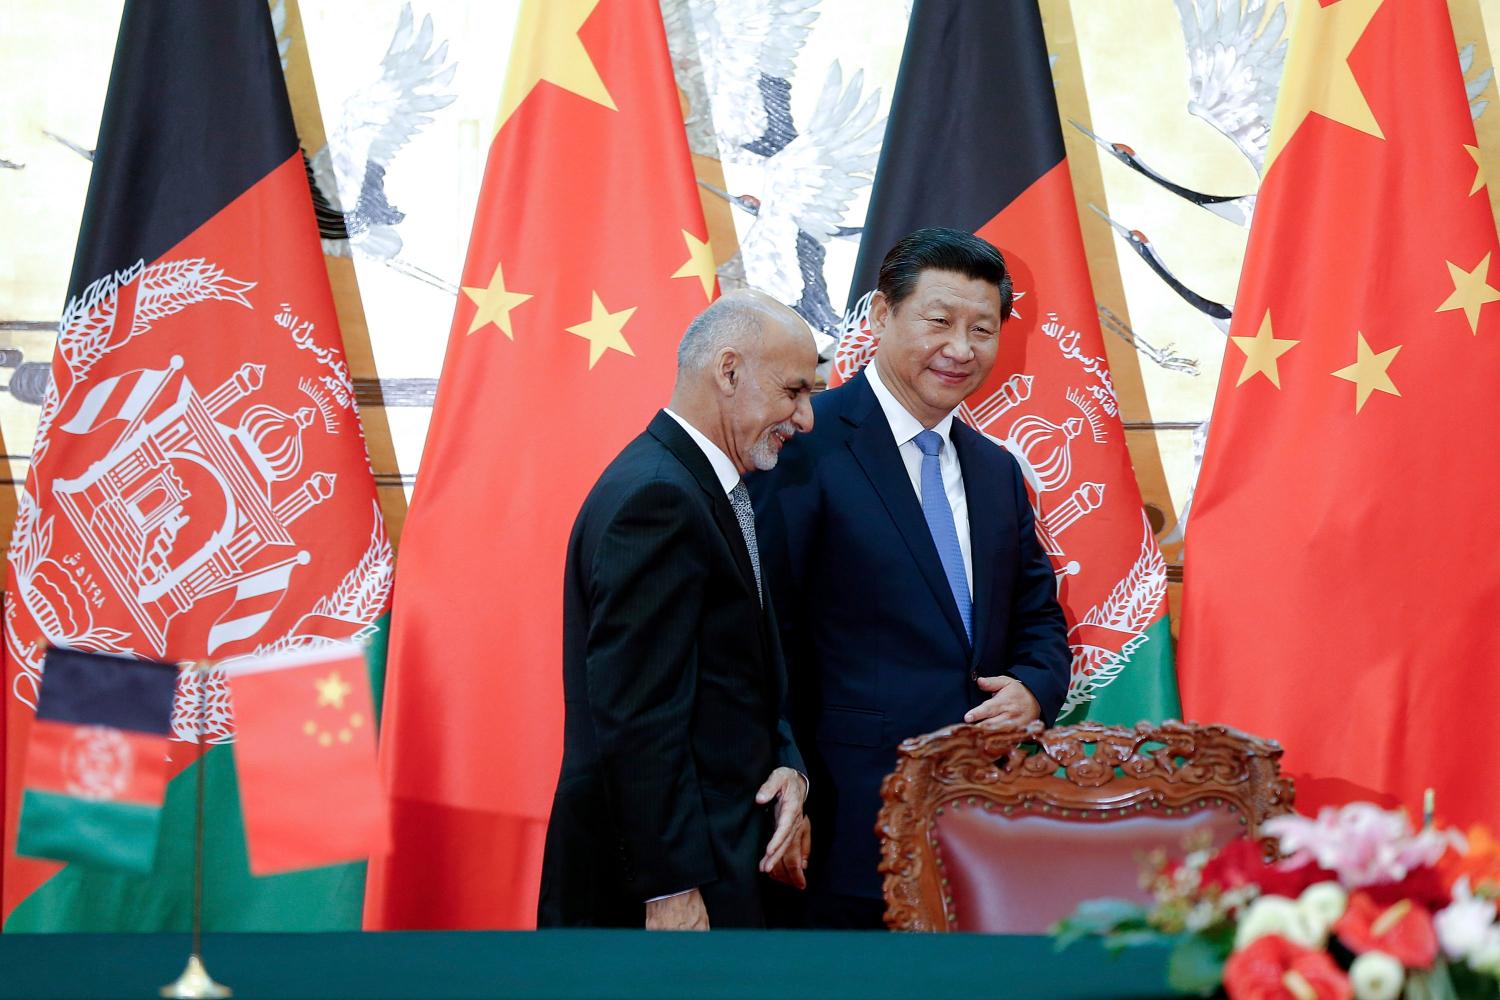 Chinese President Xi Jinping (R) and Afghan President Ashraf Ghani Ahmadzai attend a signing ceremony at the Great Hall of the People in Beijing October 28, 2014. REUTERS/Lintao Zhang/Pool (CHINA - Tags: POLITICS)